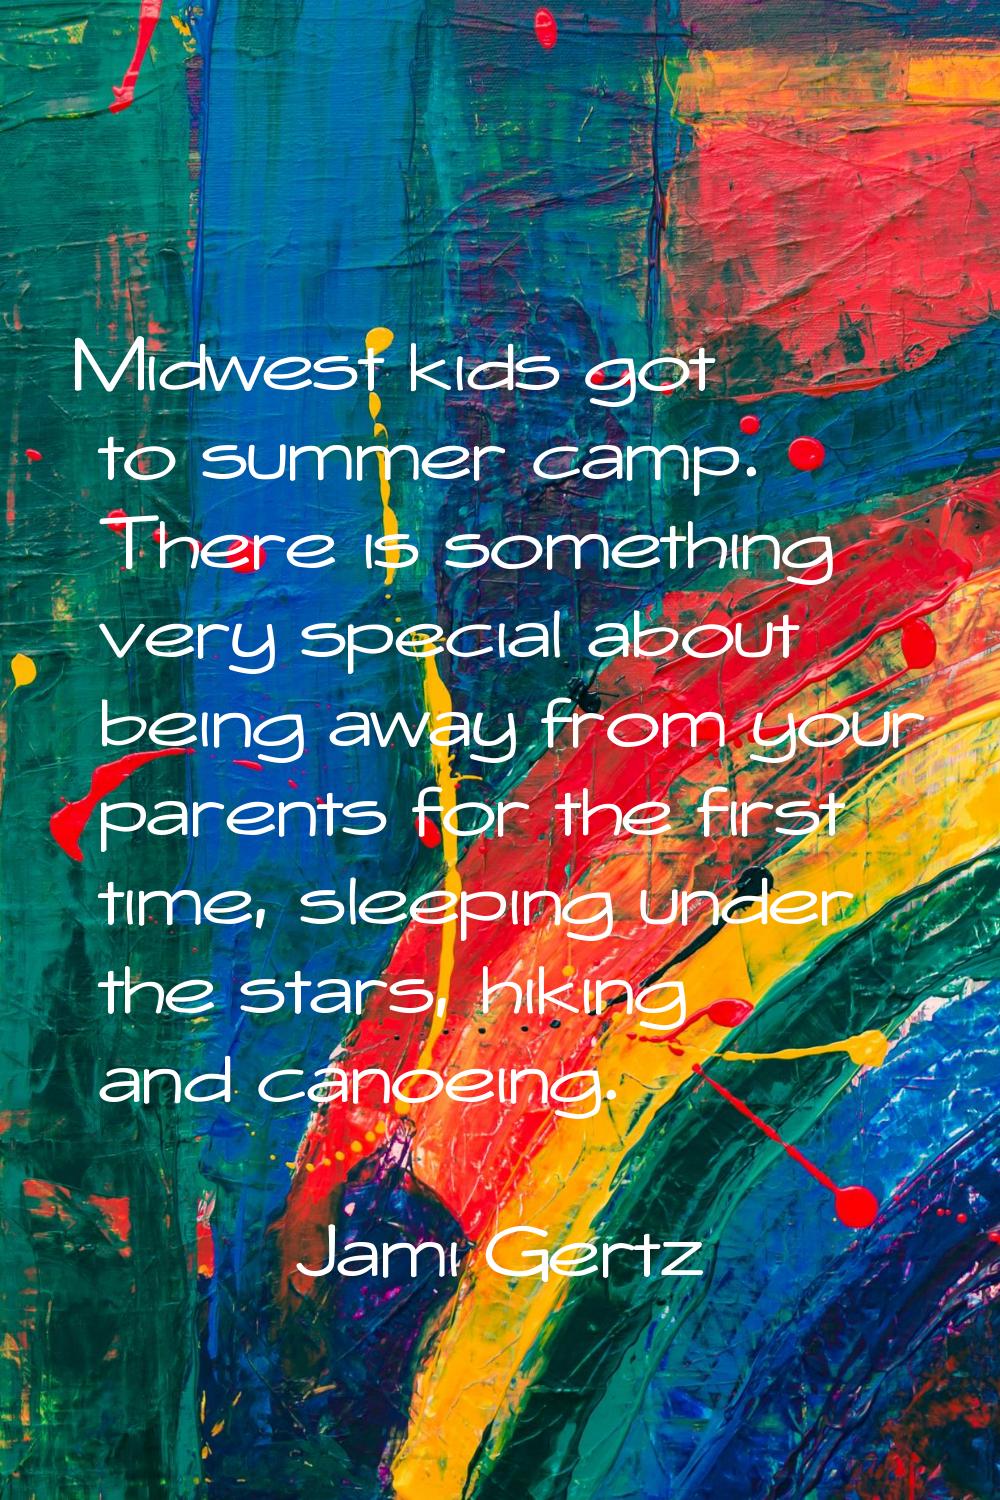 Midwest kids got to summer camp. There is something very special about being away from your parents